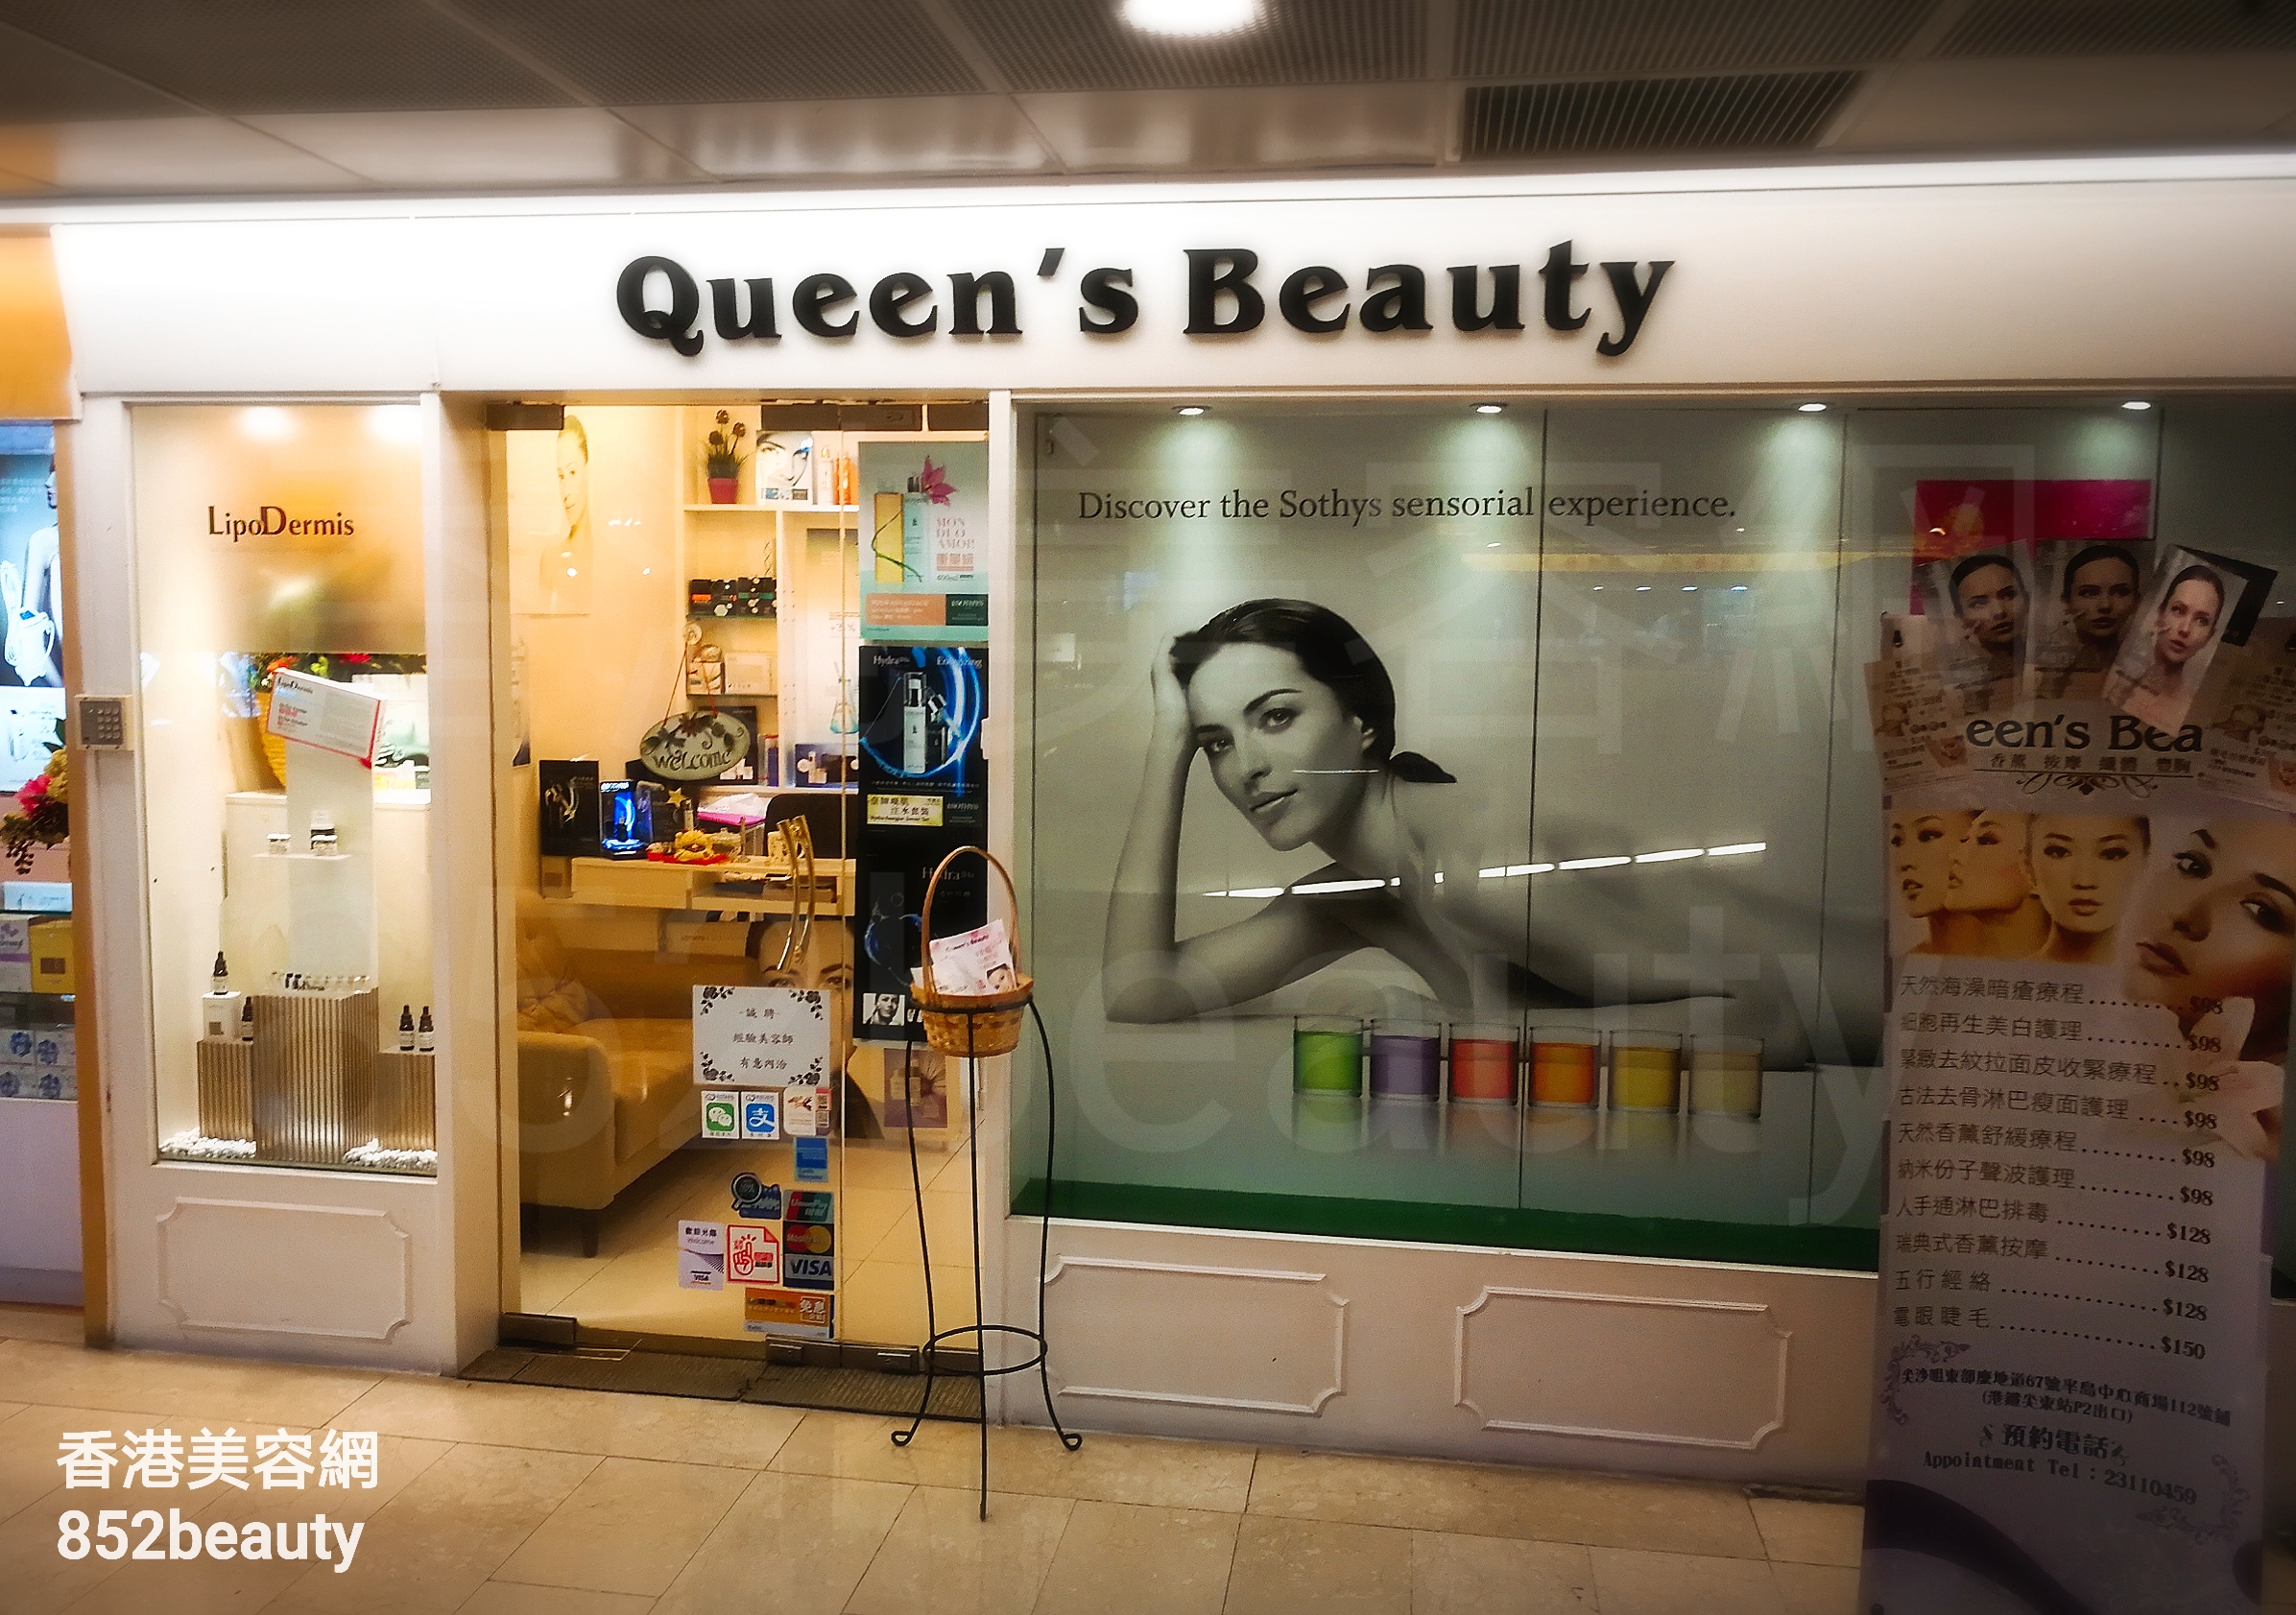 Hand and foot care: Queen's Beauty